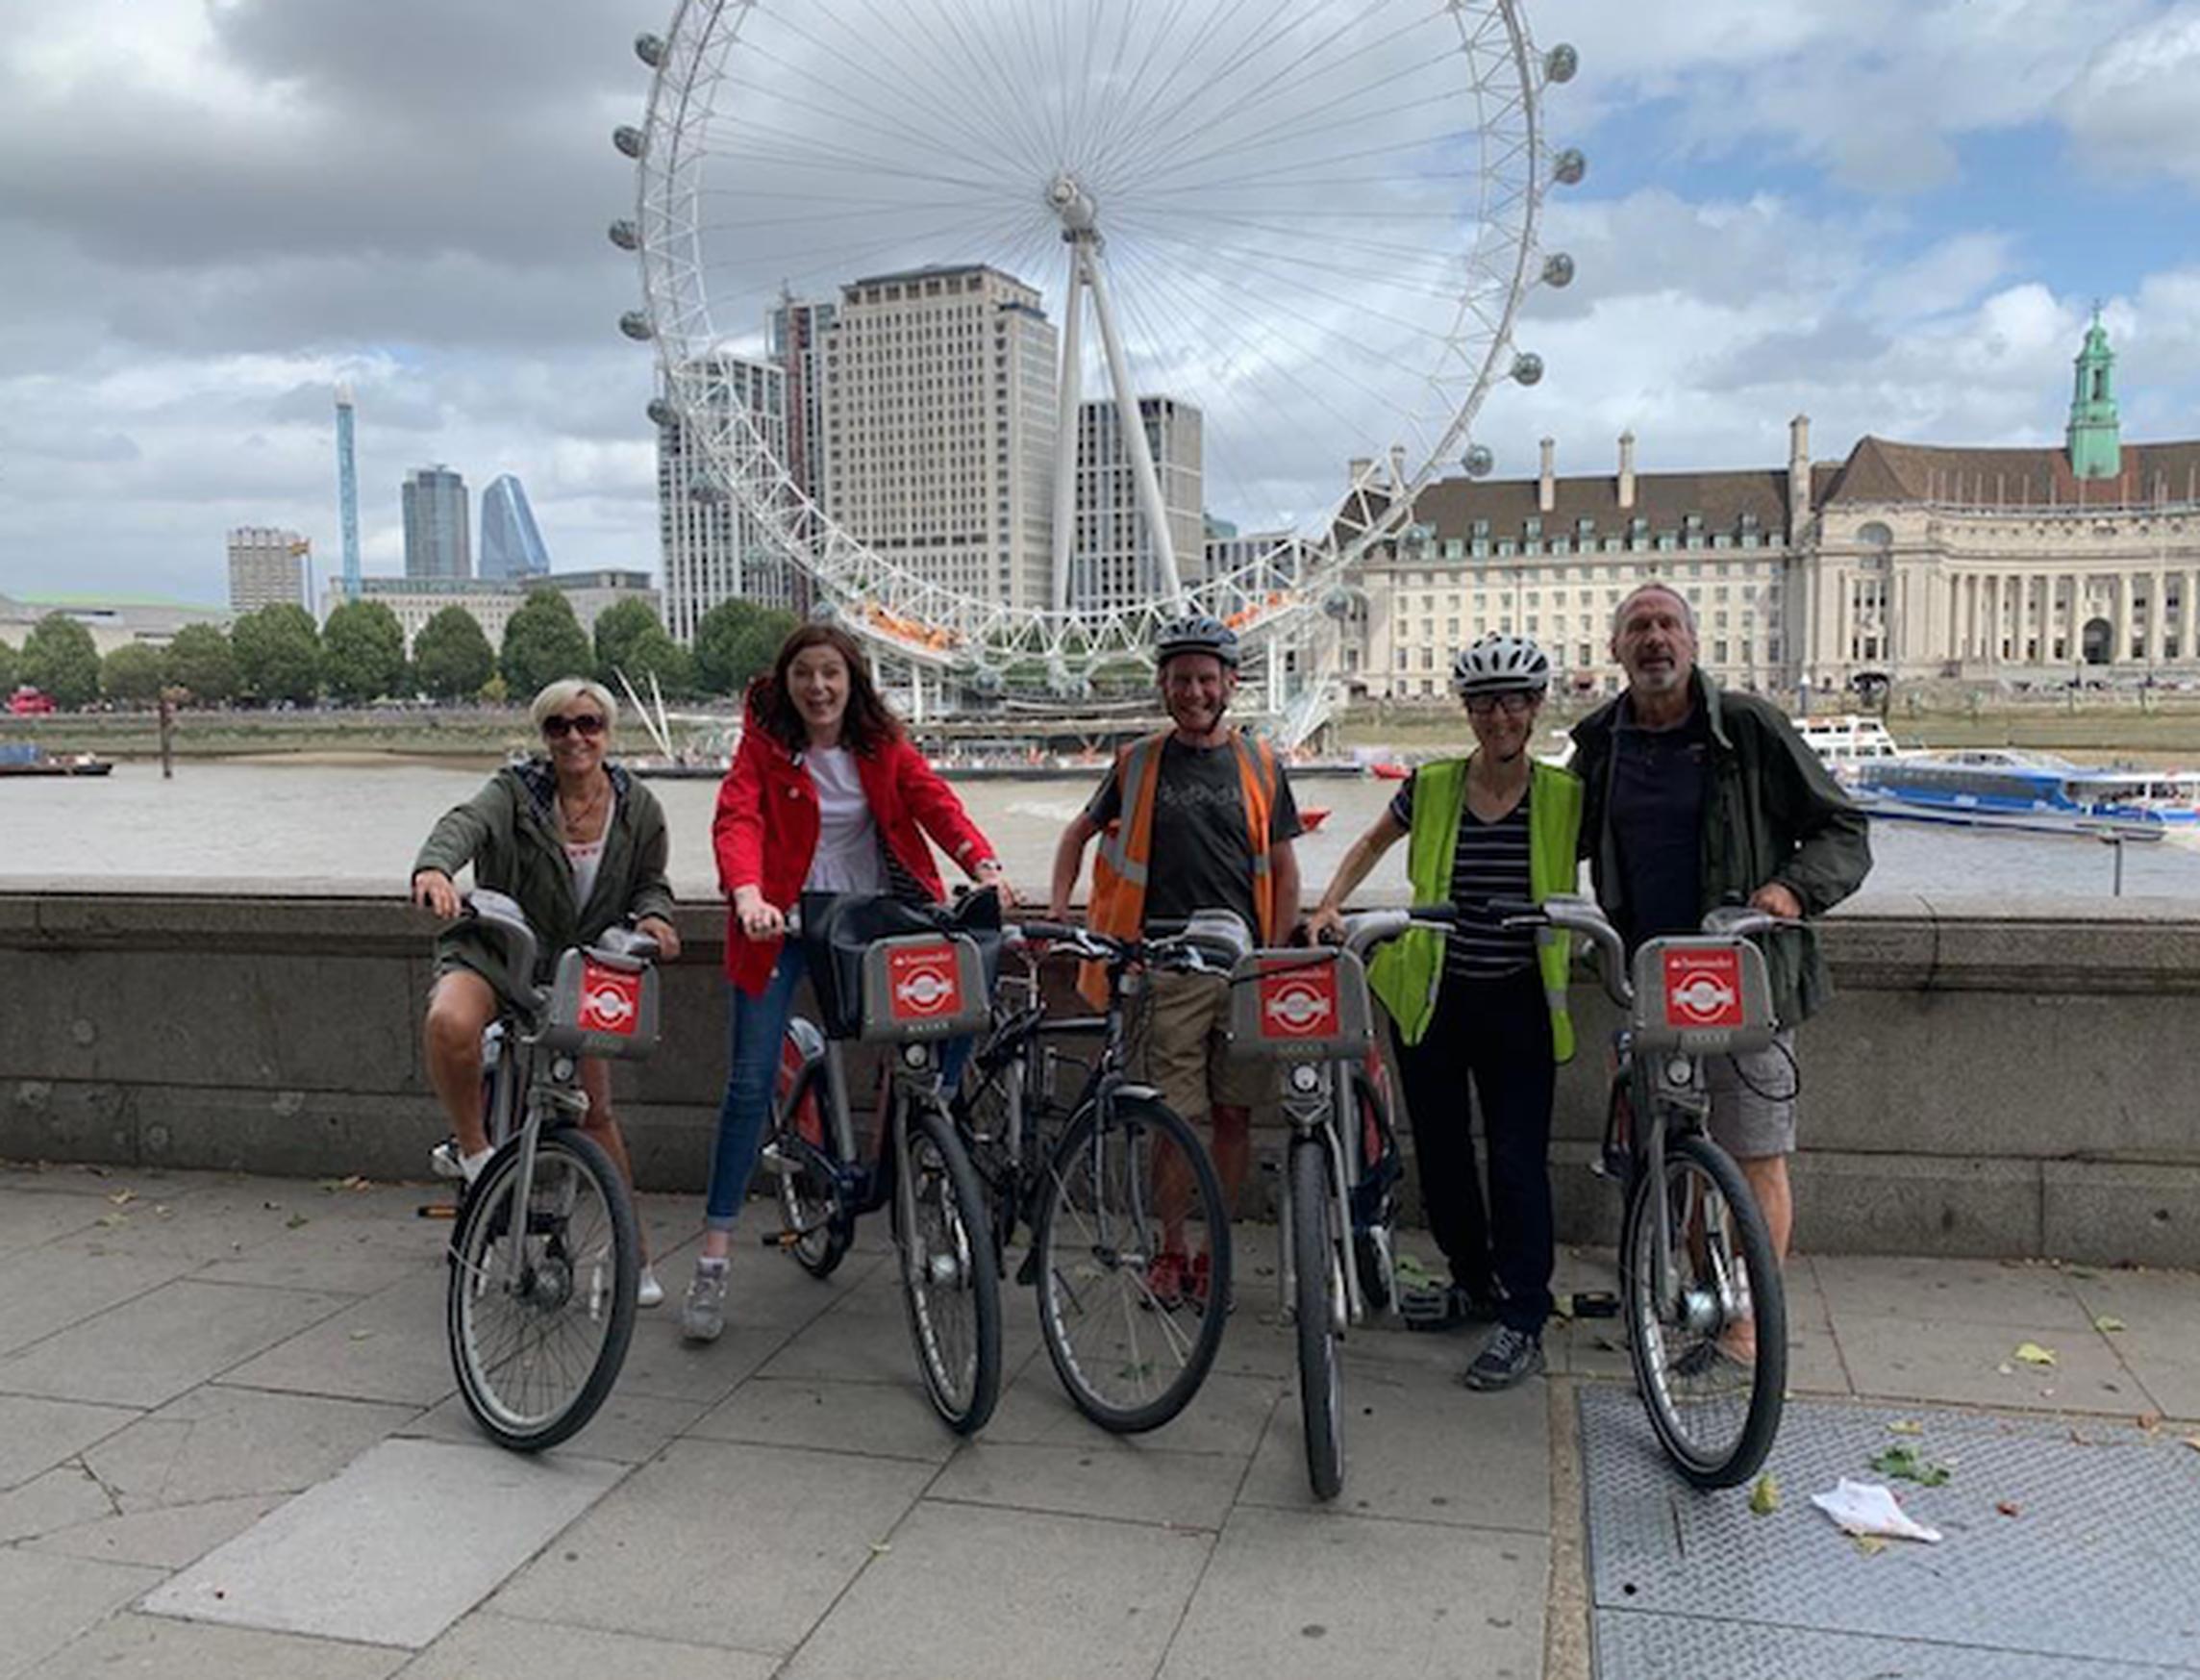 Winners of the cycle hire 10 anniversary competition, Sakhr Al-Makhadhi (January), Emdad Rahman (May) and Liz Harwood (June) have been introduced to their honorary bikes, which bear their names on unique gold livery